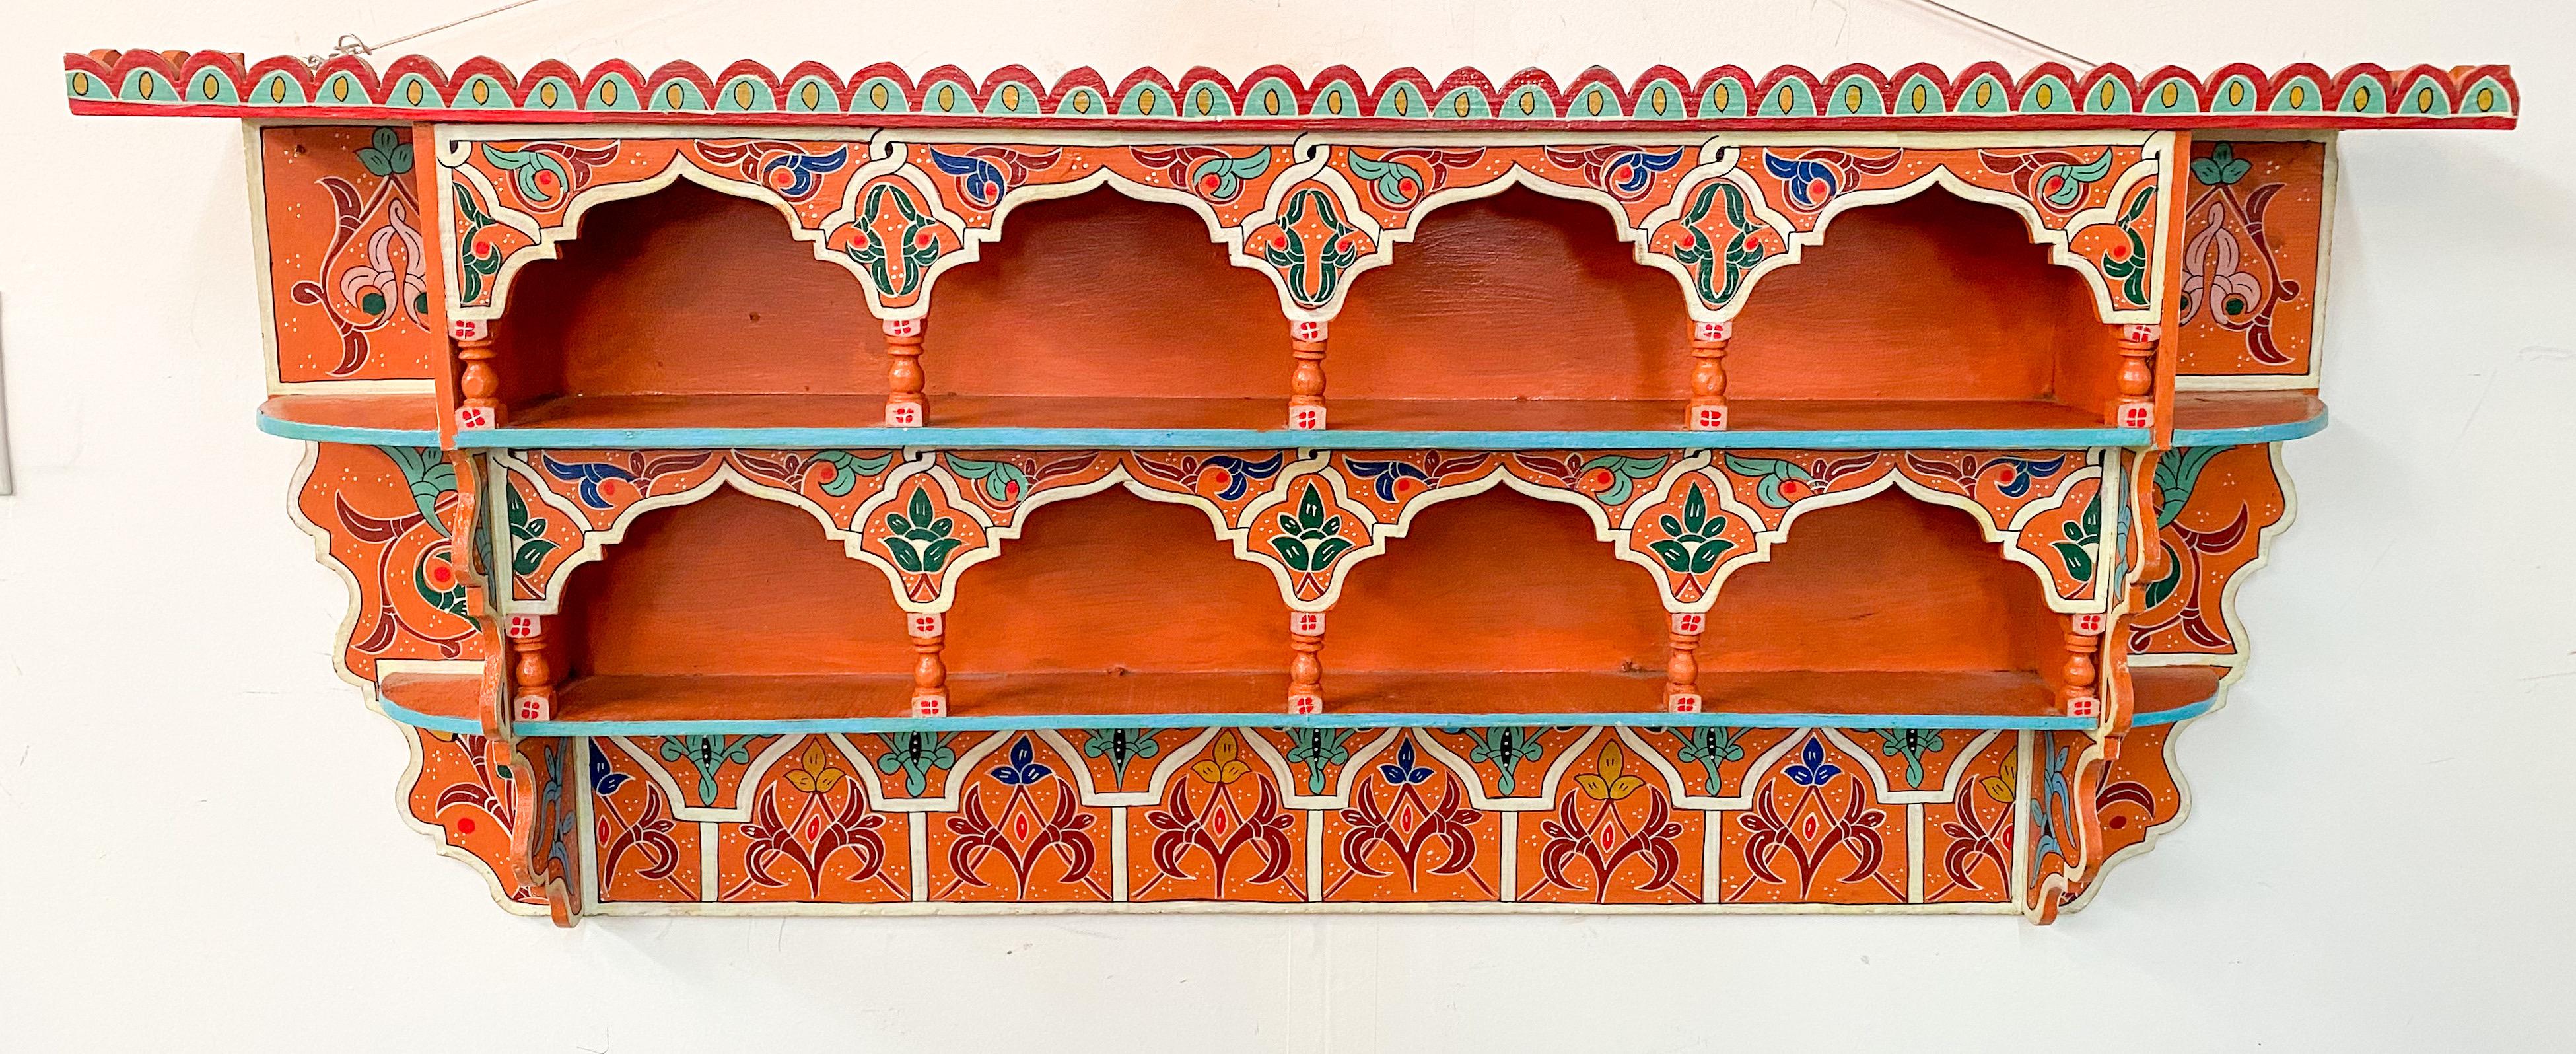 A beautiful vintage Moroccan Moorish wall shelf or spice rack. The Moroccan shelf is beautifully hand painted in vibrant orange with multi-color design and features centuries old Moorish design of geometrical patterns and arches with multiple